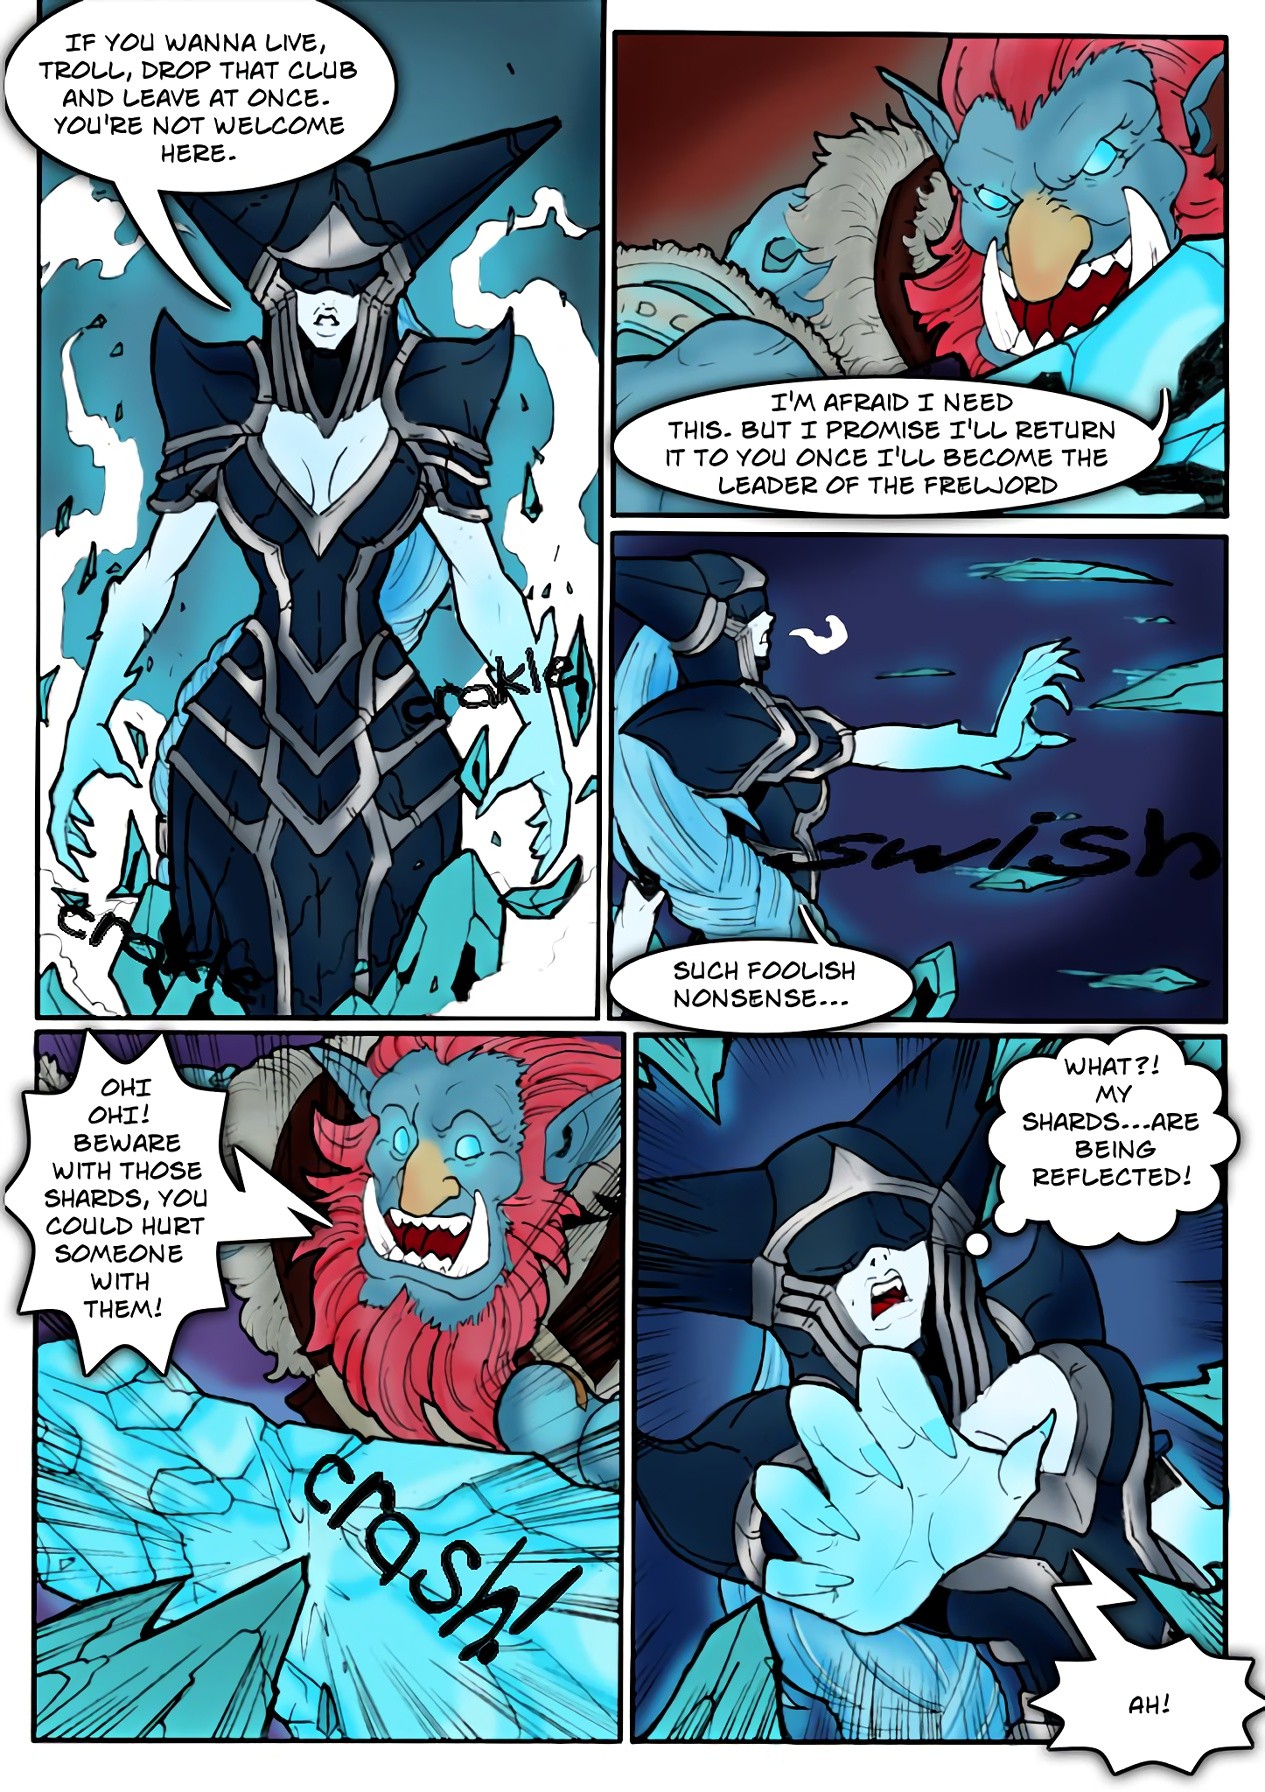 Tales of the Troll King ch. 1 - 3 ] [Colorized] porn comic picture 4